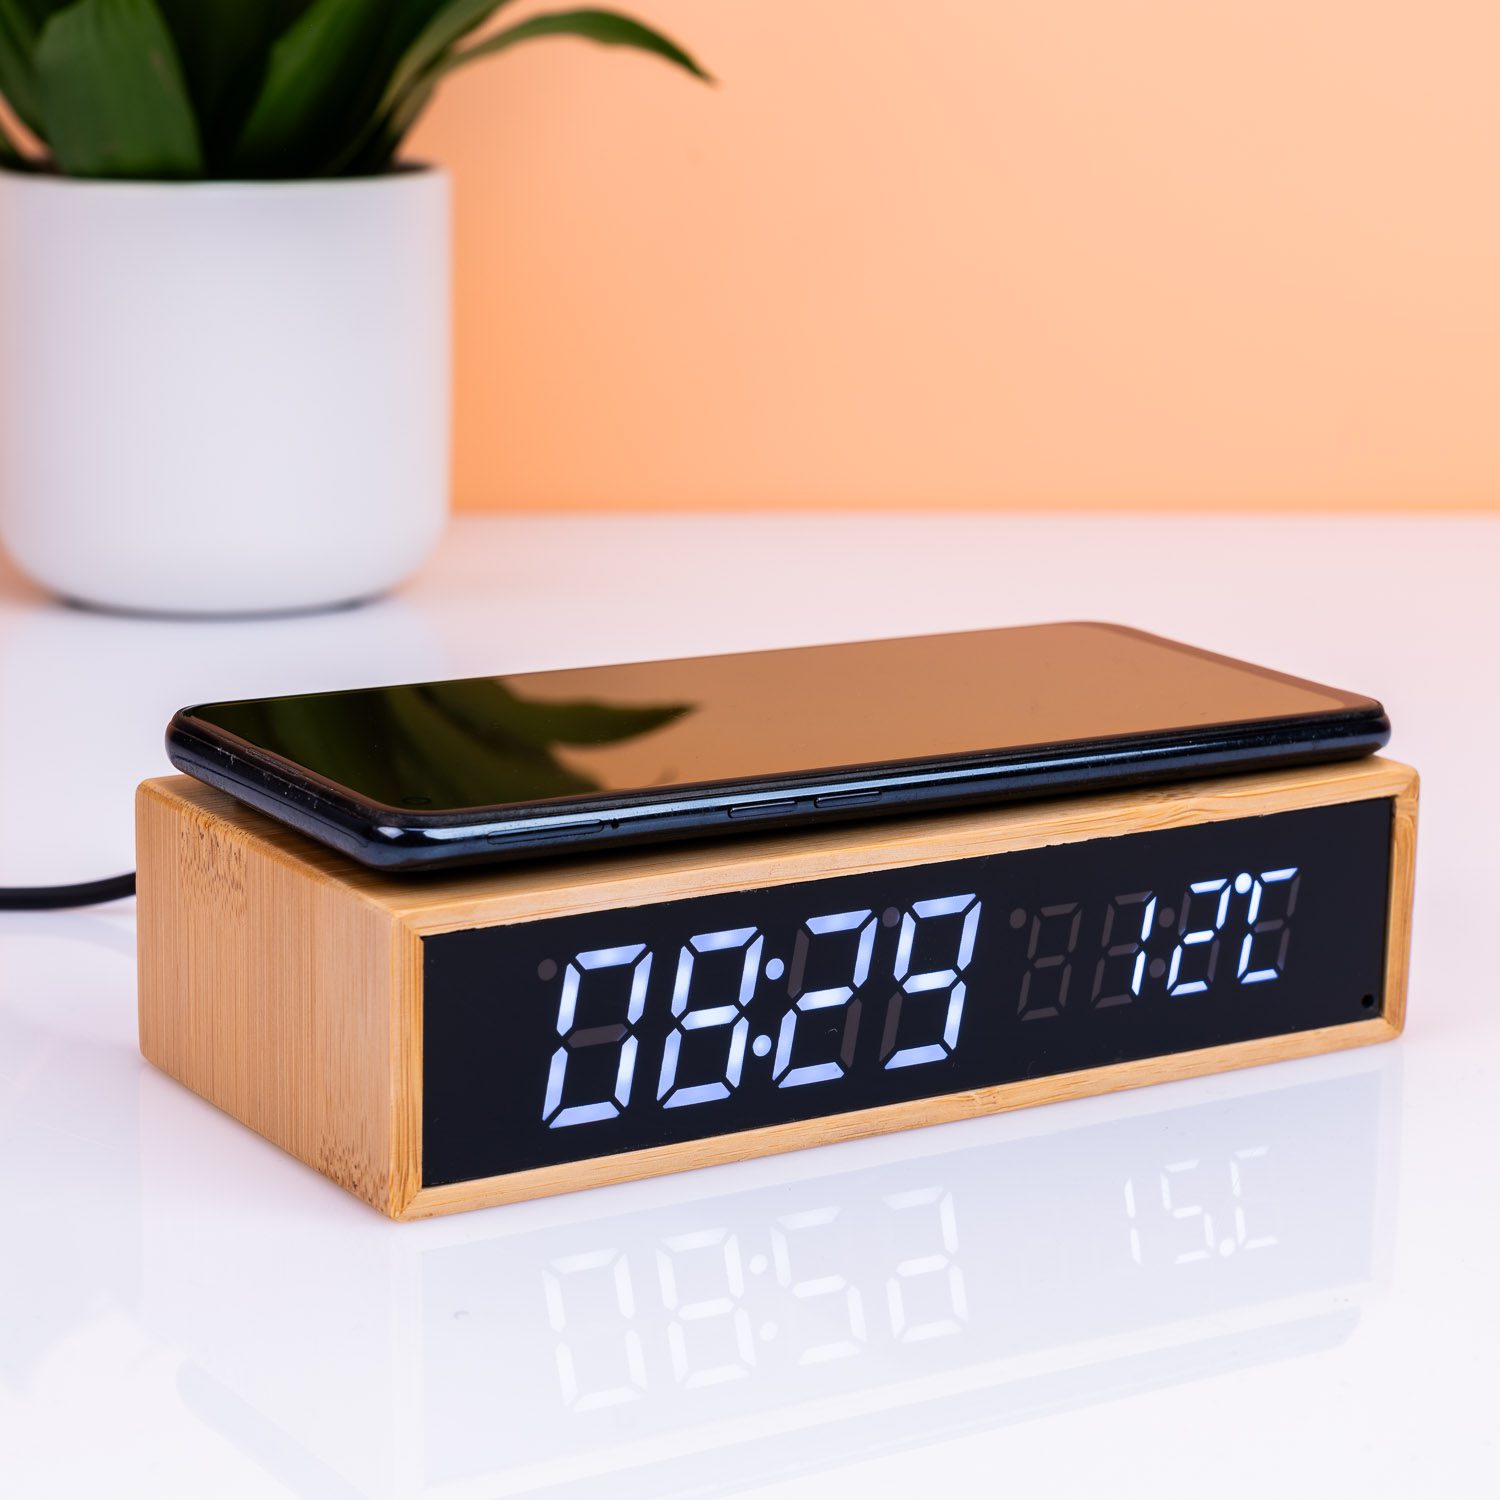 Mikamax Bamboo Wireless Charger Clock